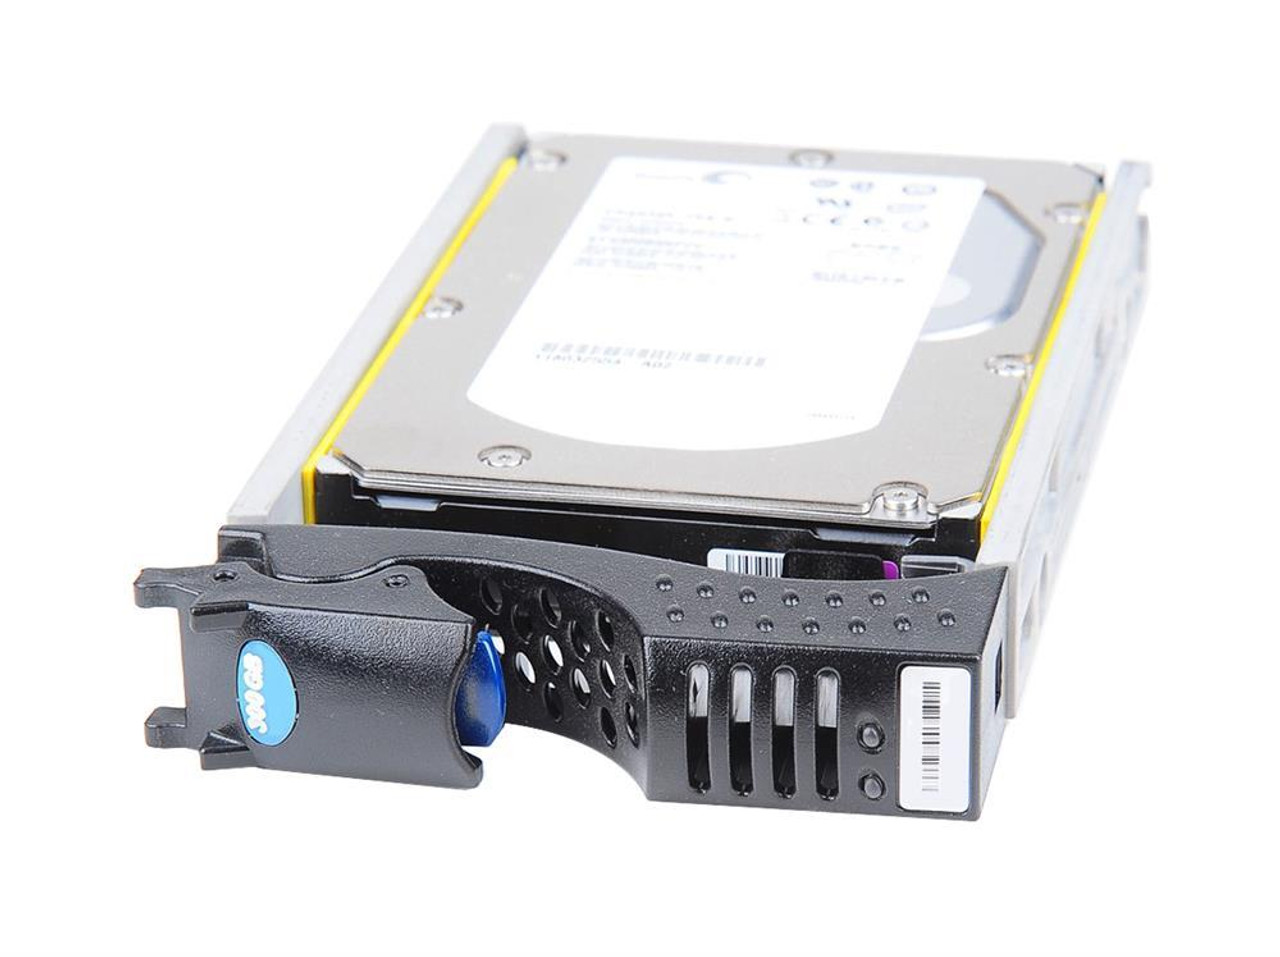 005048703 EMC 300GB 10000RPM Fibre Channel 2Gbps 16MB Cache 3.5-inch Internal Hard Drive for CLARiiON CX3/ CX Series Storage Systems